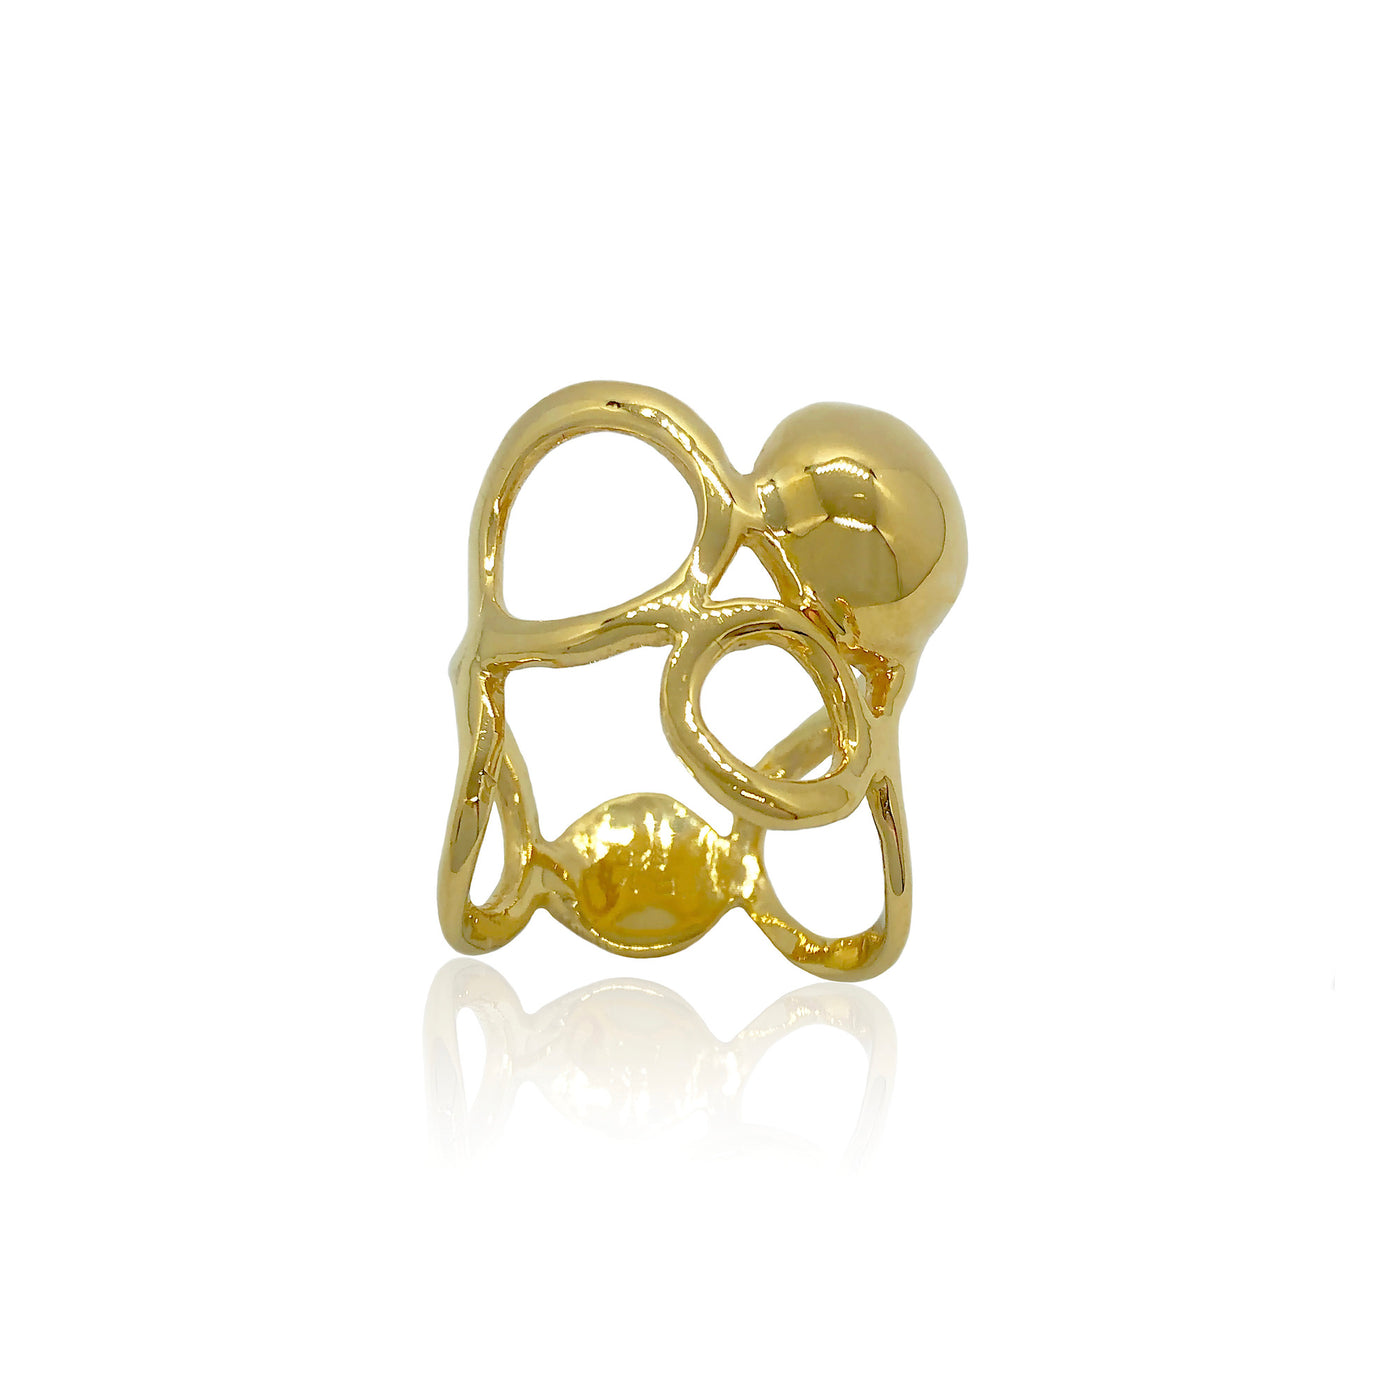 Fine jewelry gold cocktail ring from Atelier ORMAN